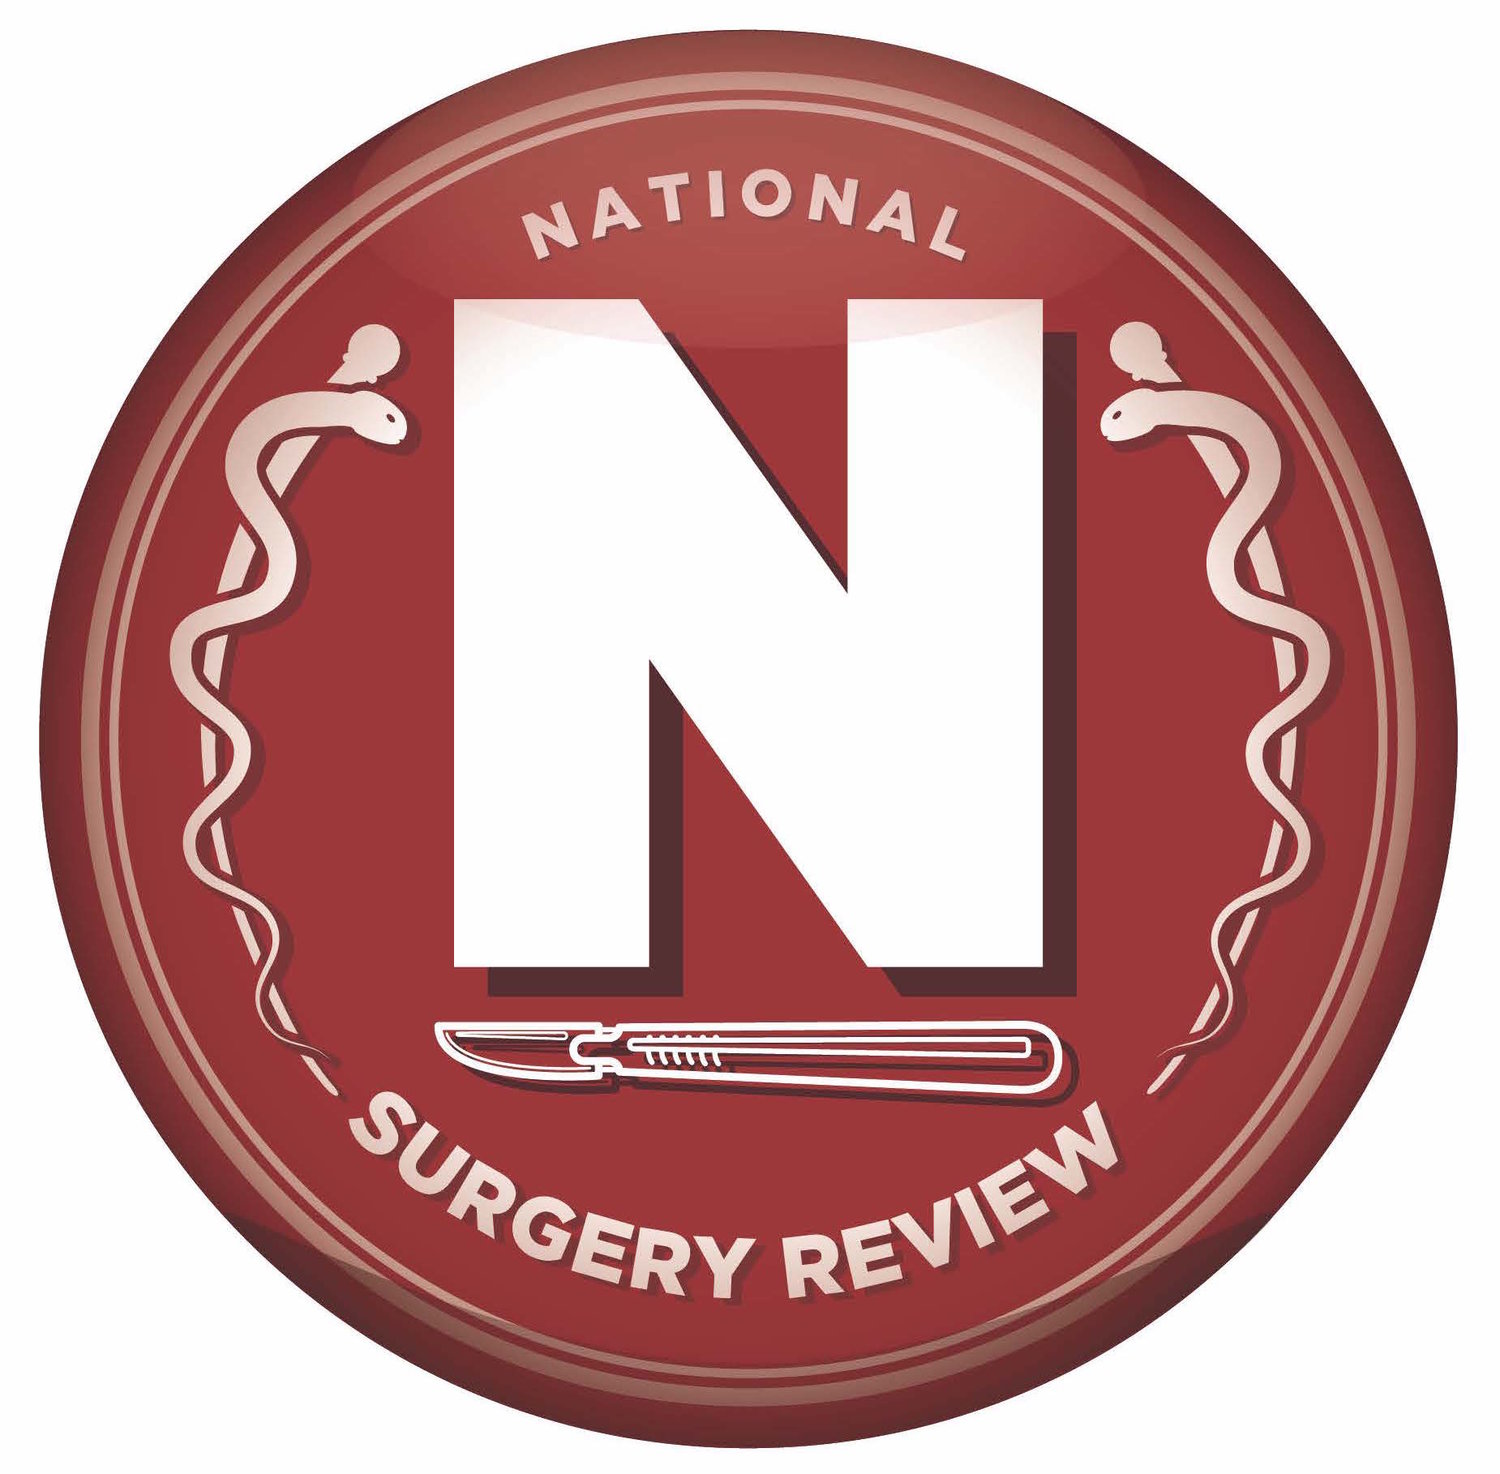  National Surgery Review